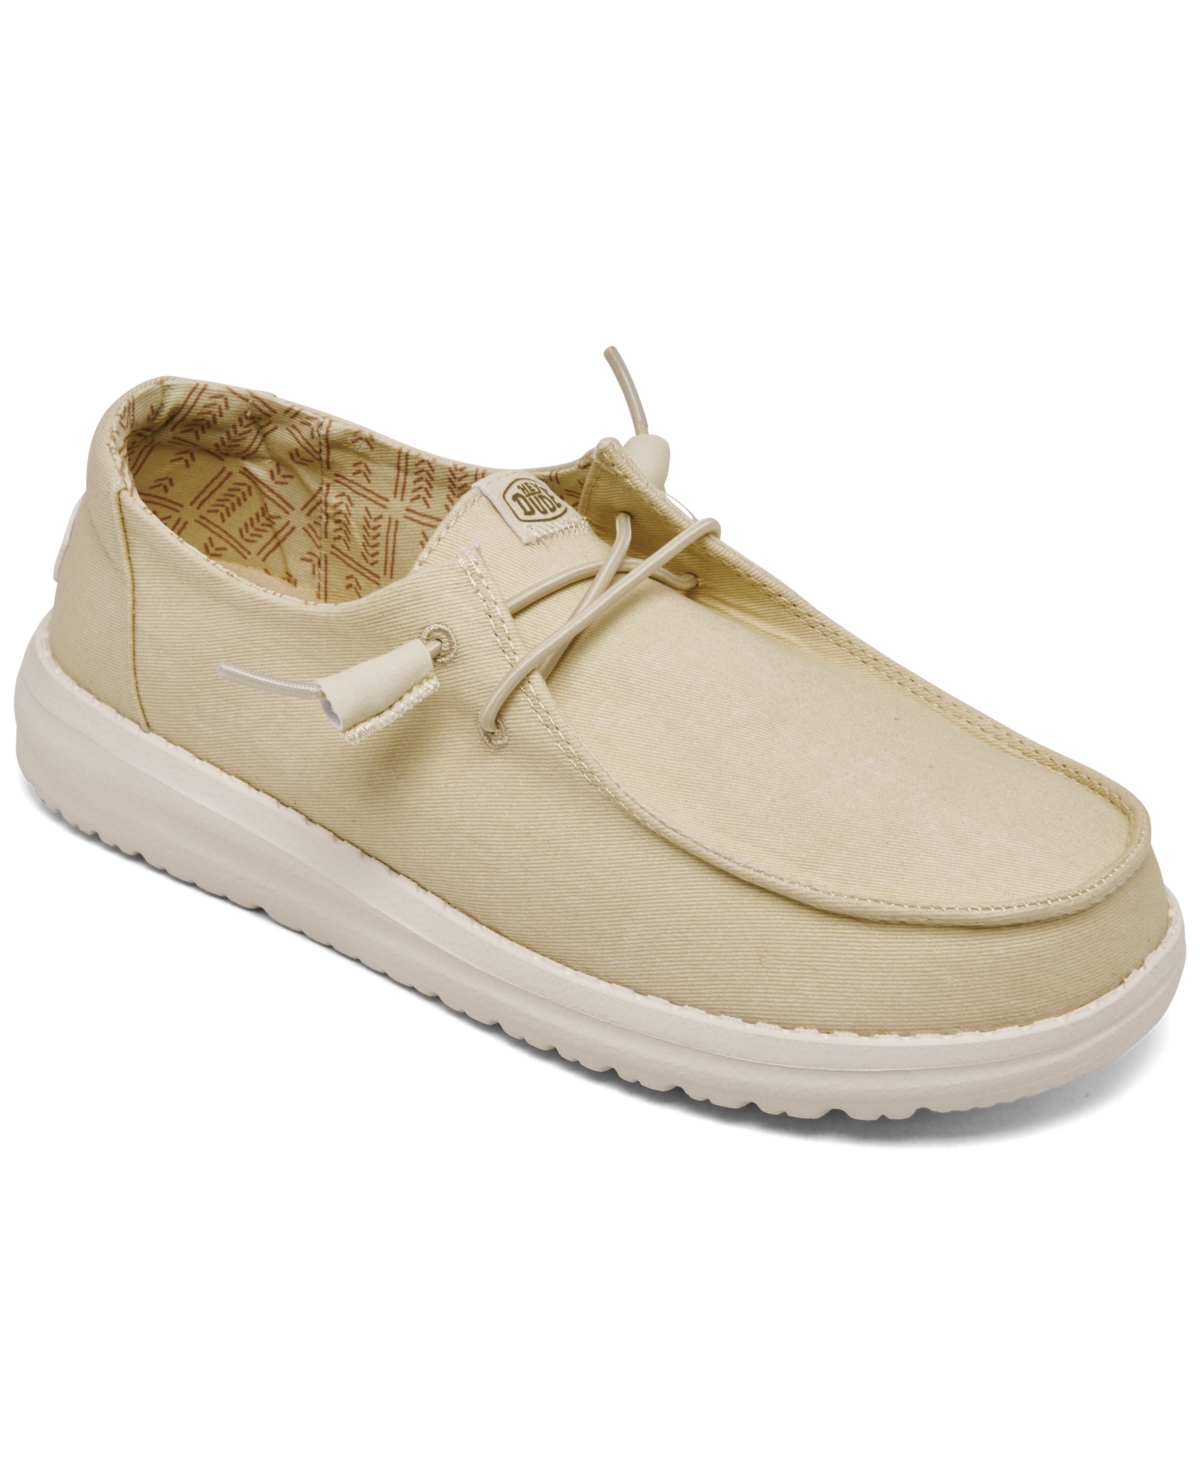 Women's Wendy Canvas Casual Moccasin Sneakers from Finish Line - Light beige